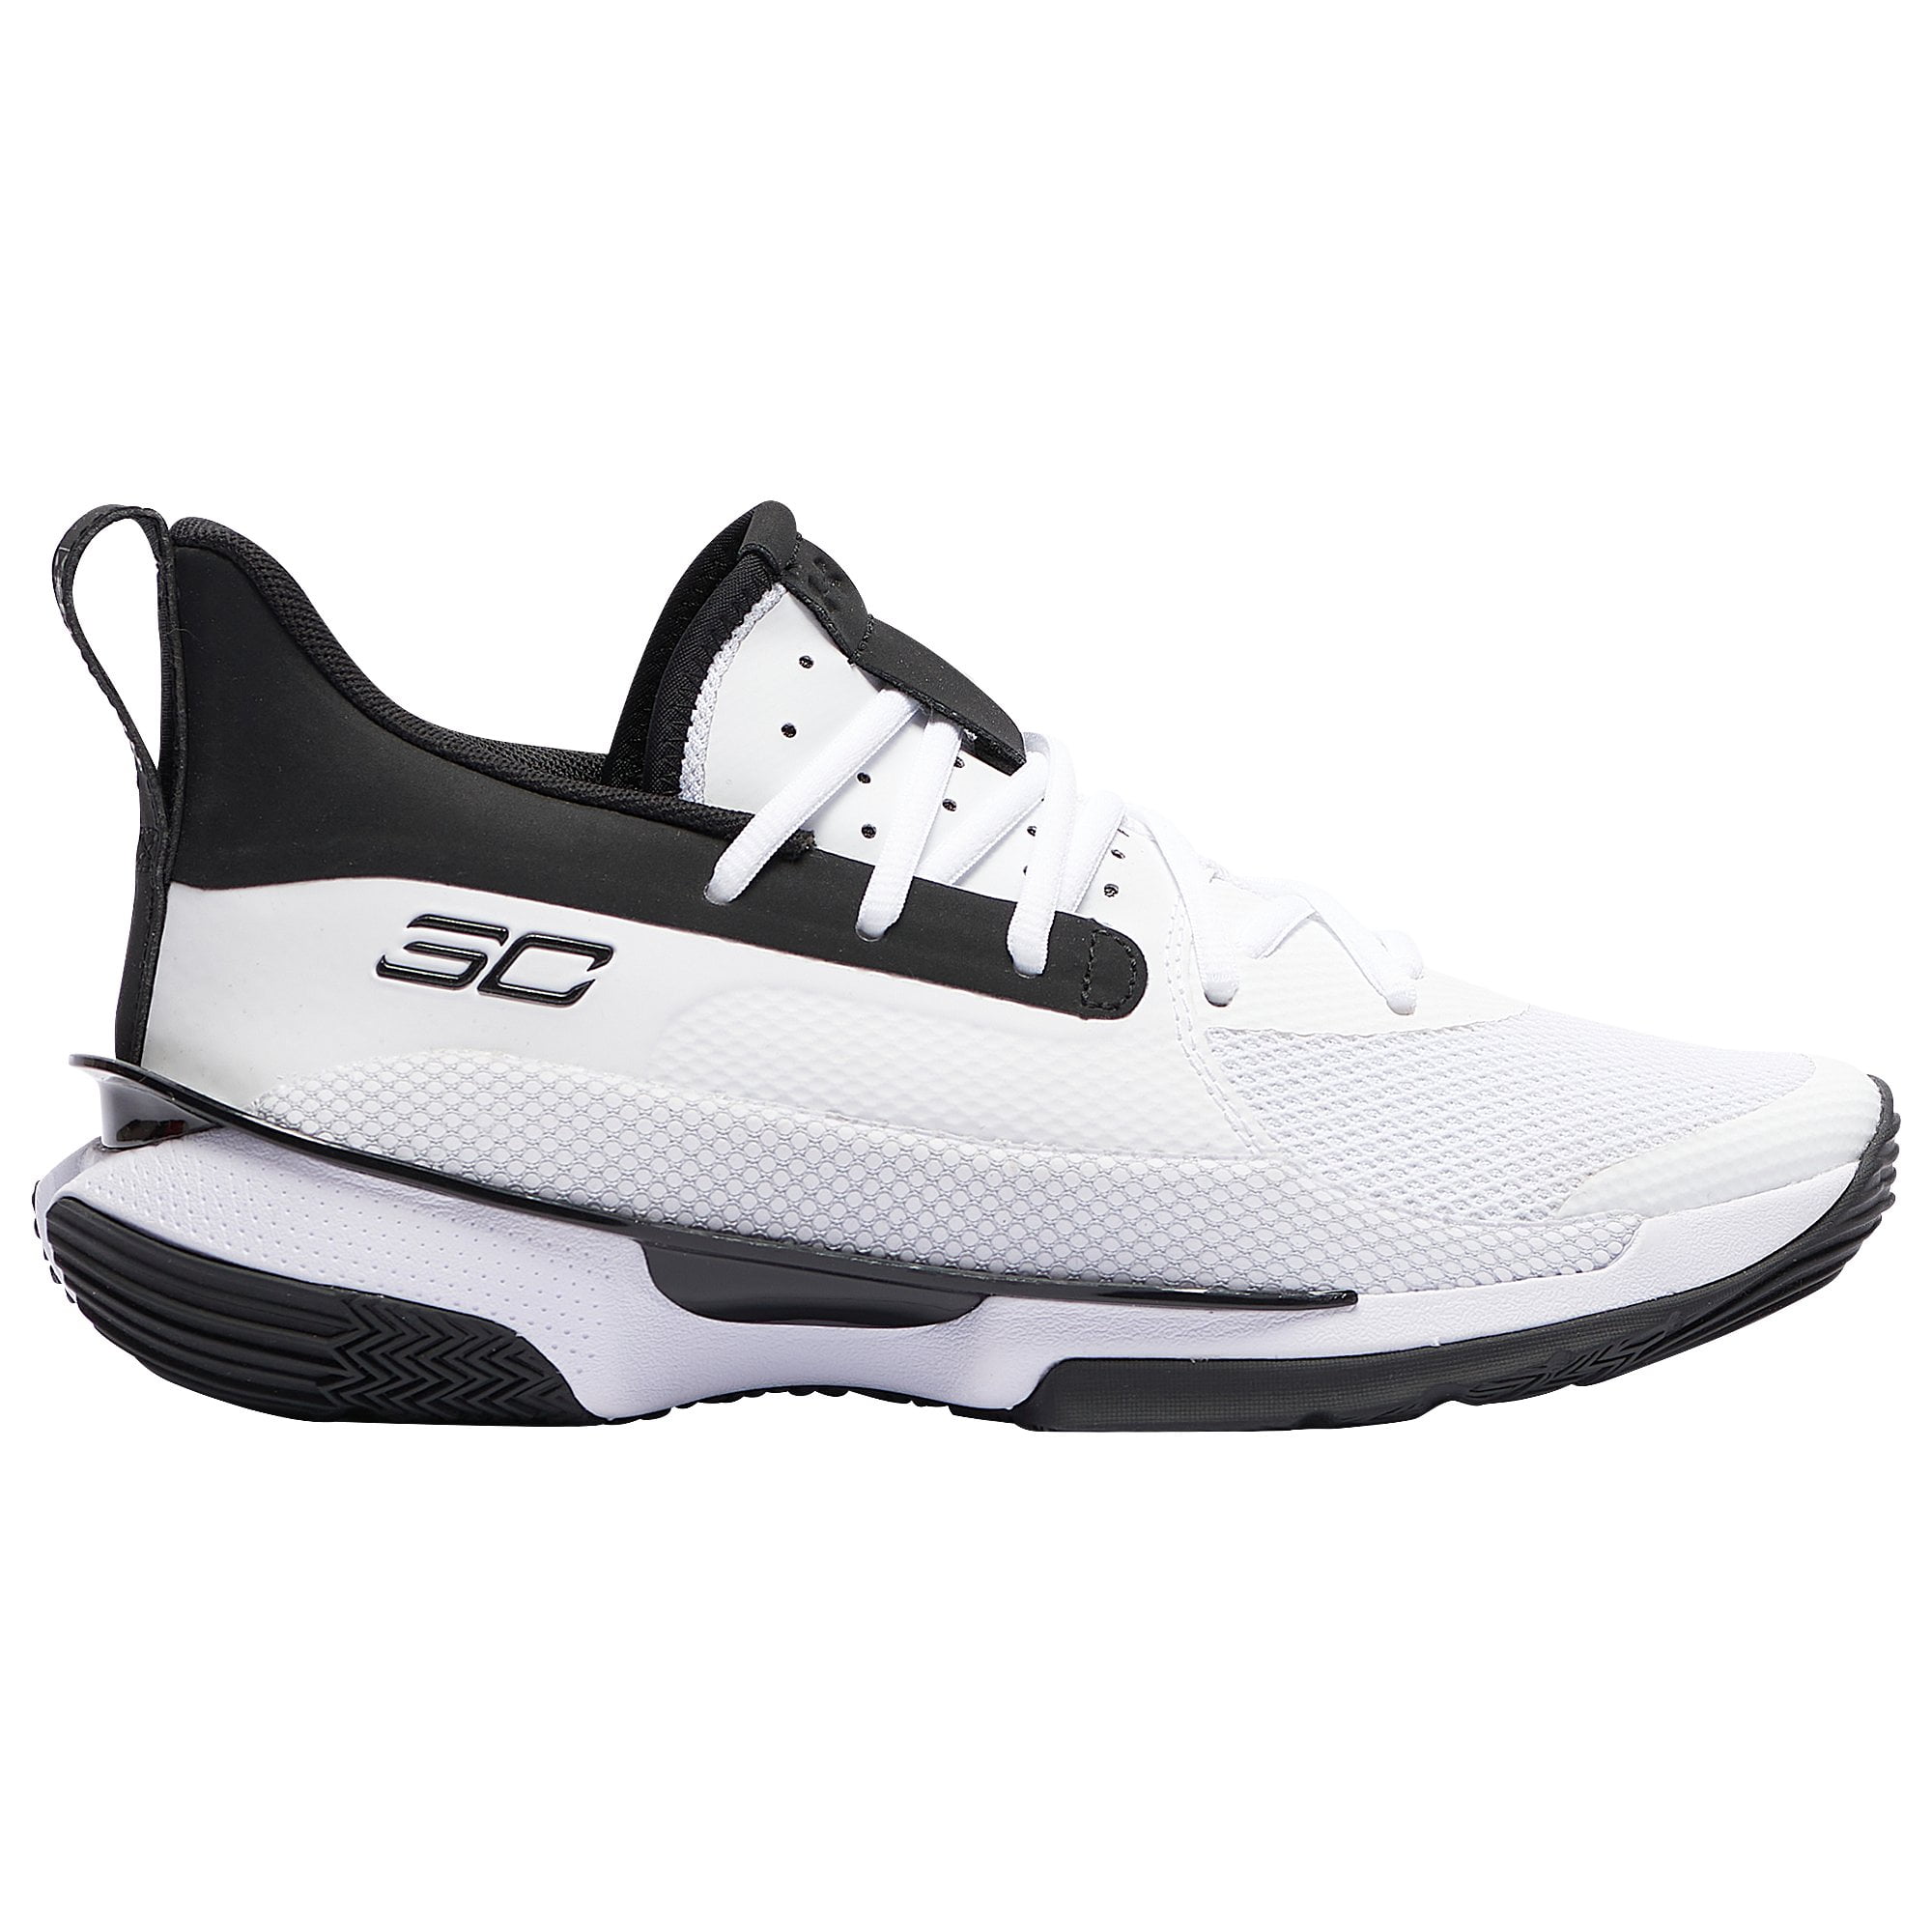 New Under Armour Boy's UA Curry Two Low Basketball Shoes-White $89.99 